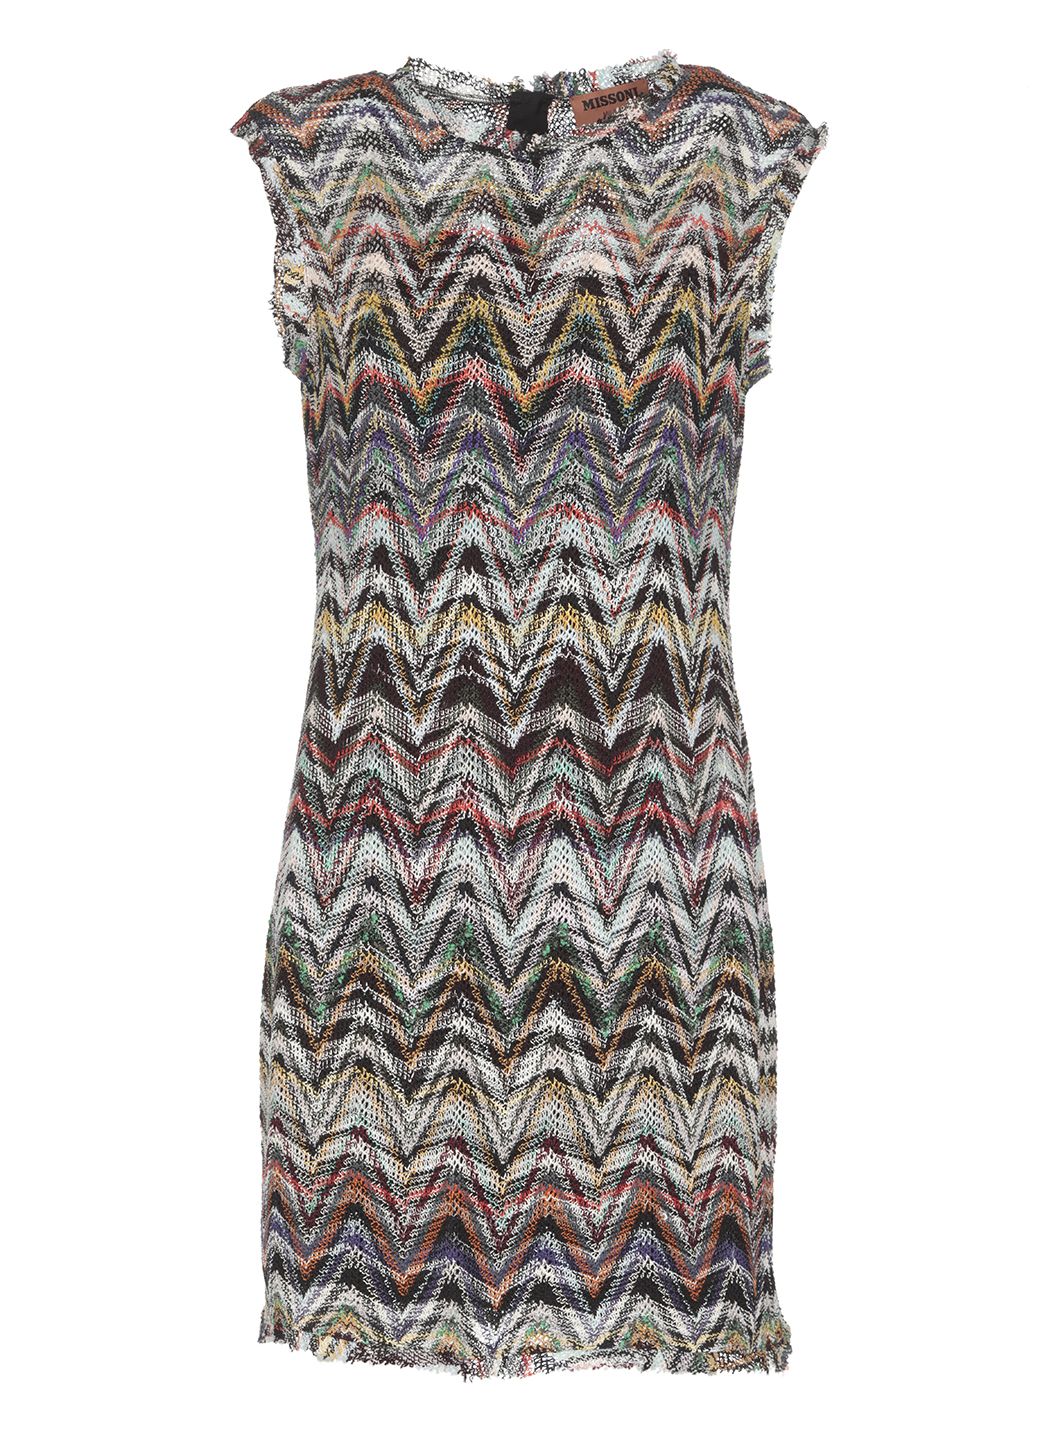 Multicolor knitted dress